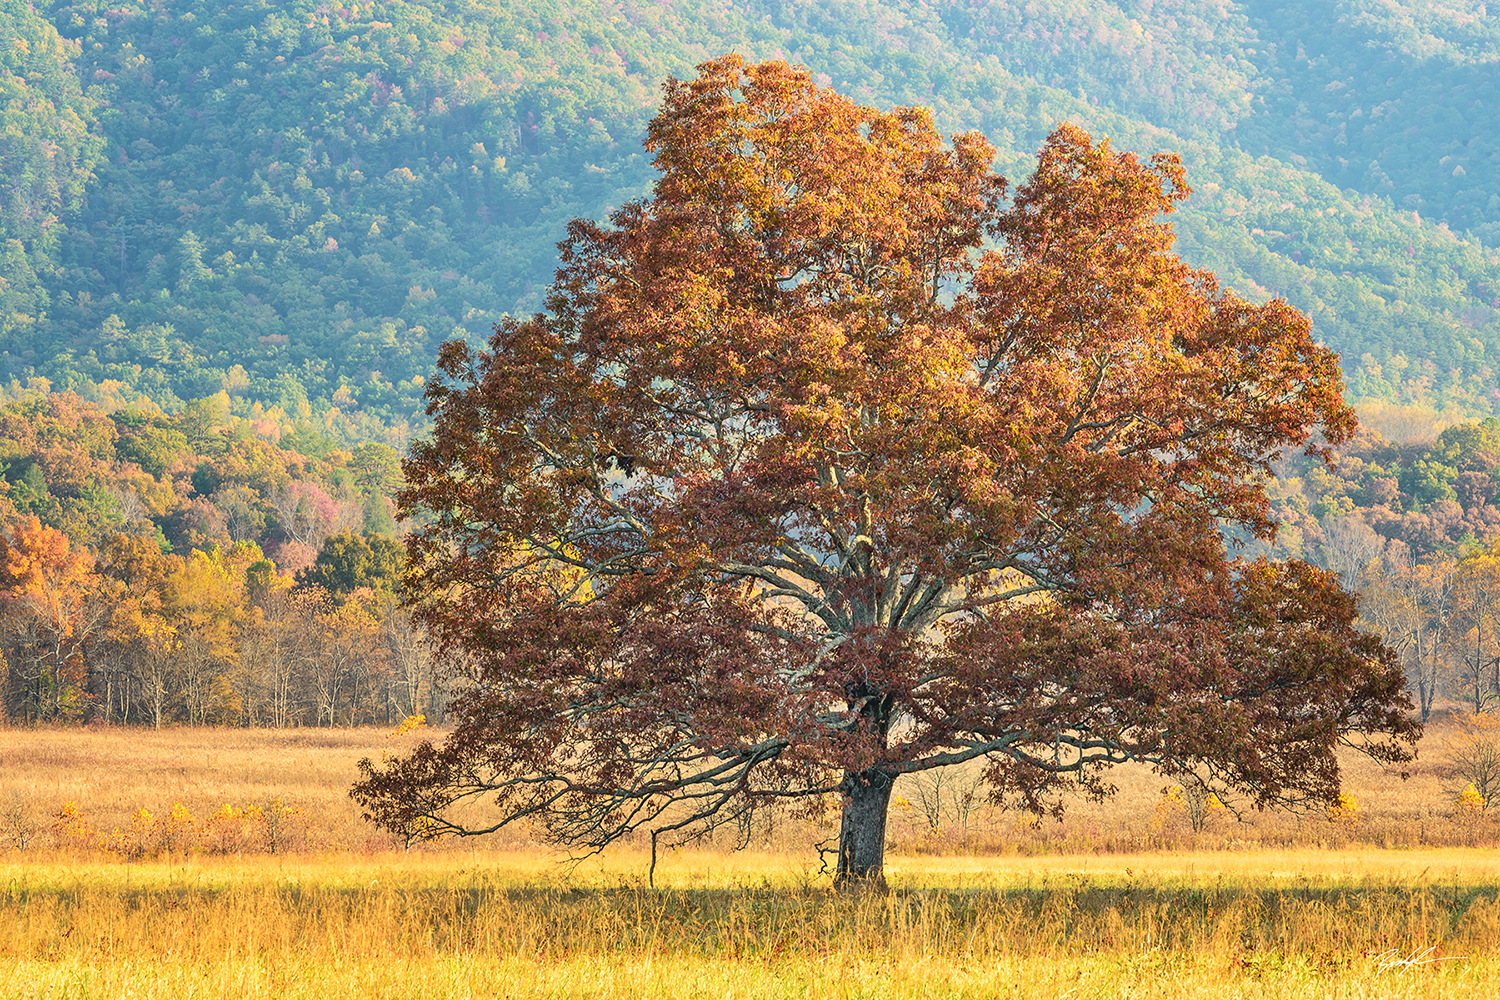 Golden Tree Cades Cove Smoky Mountain National Park Tennessee